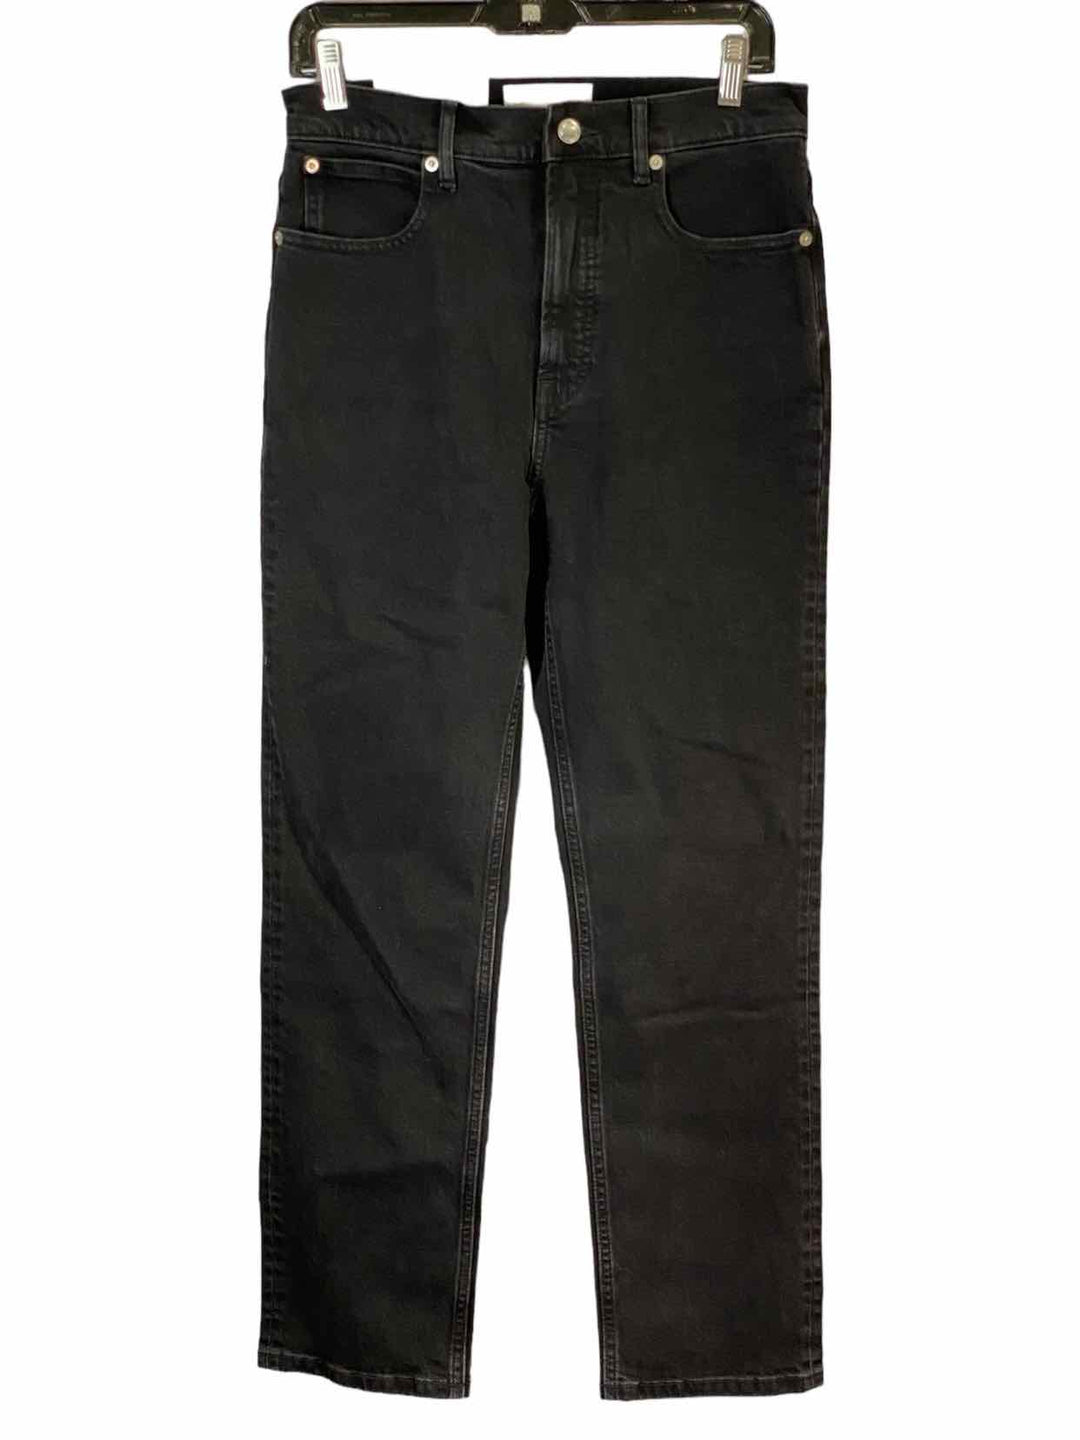 Everlane Size 28S Black NWT Jeans